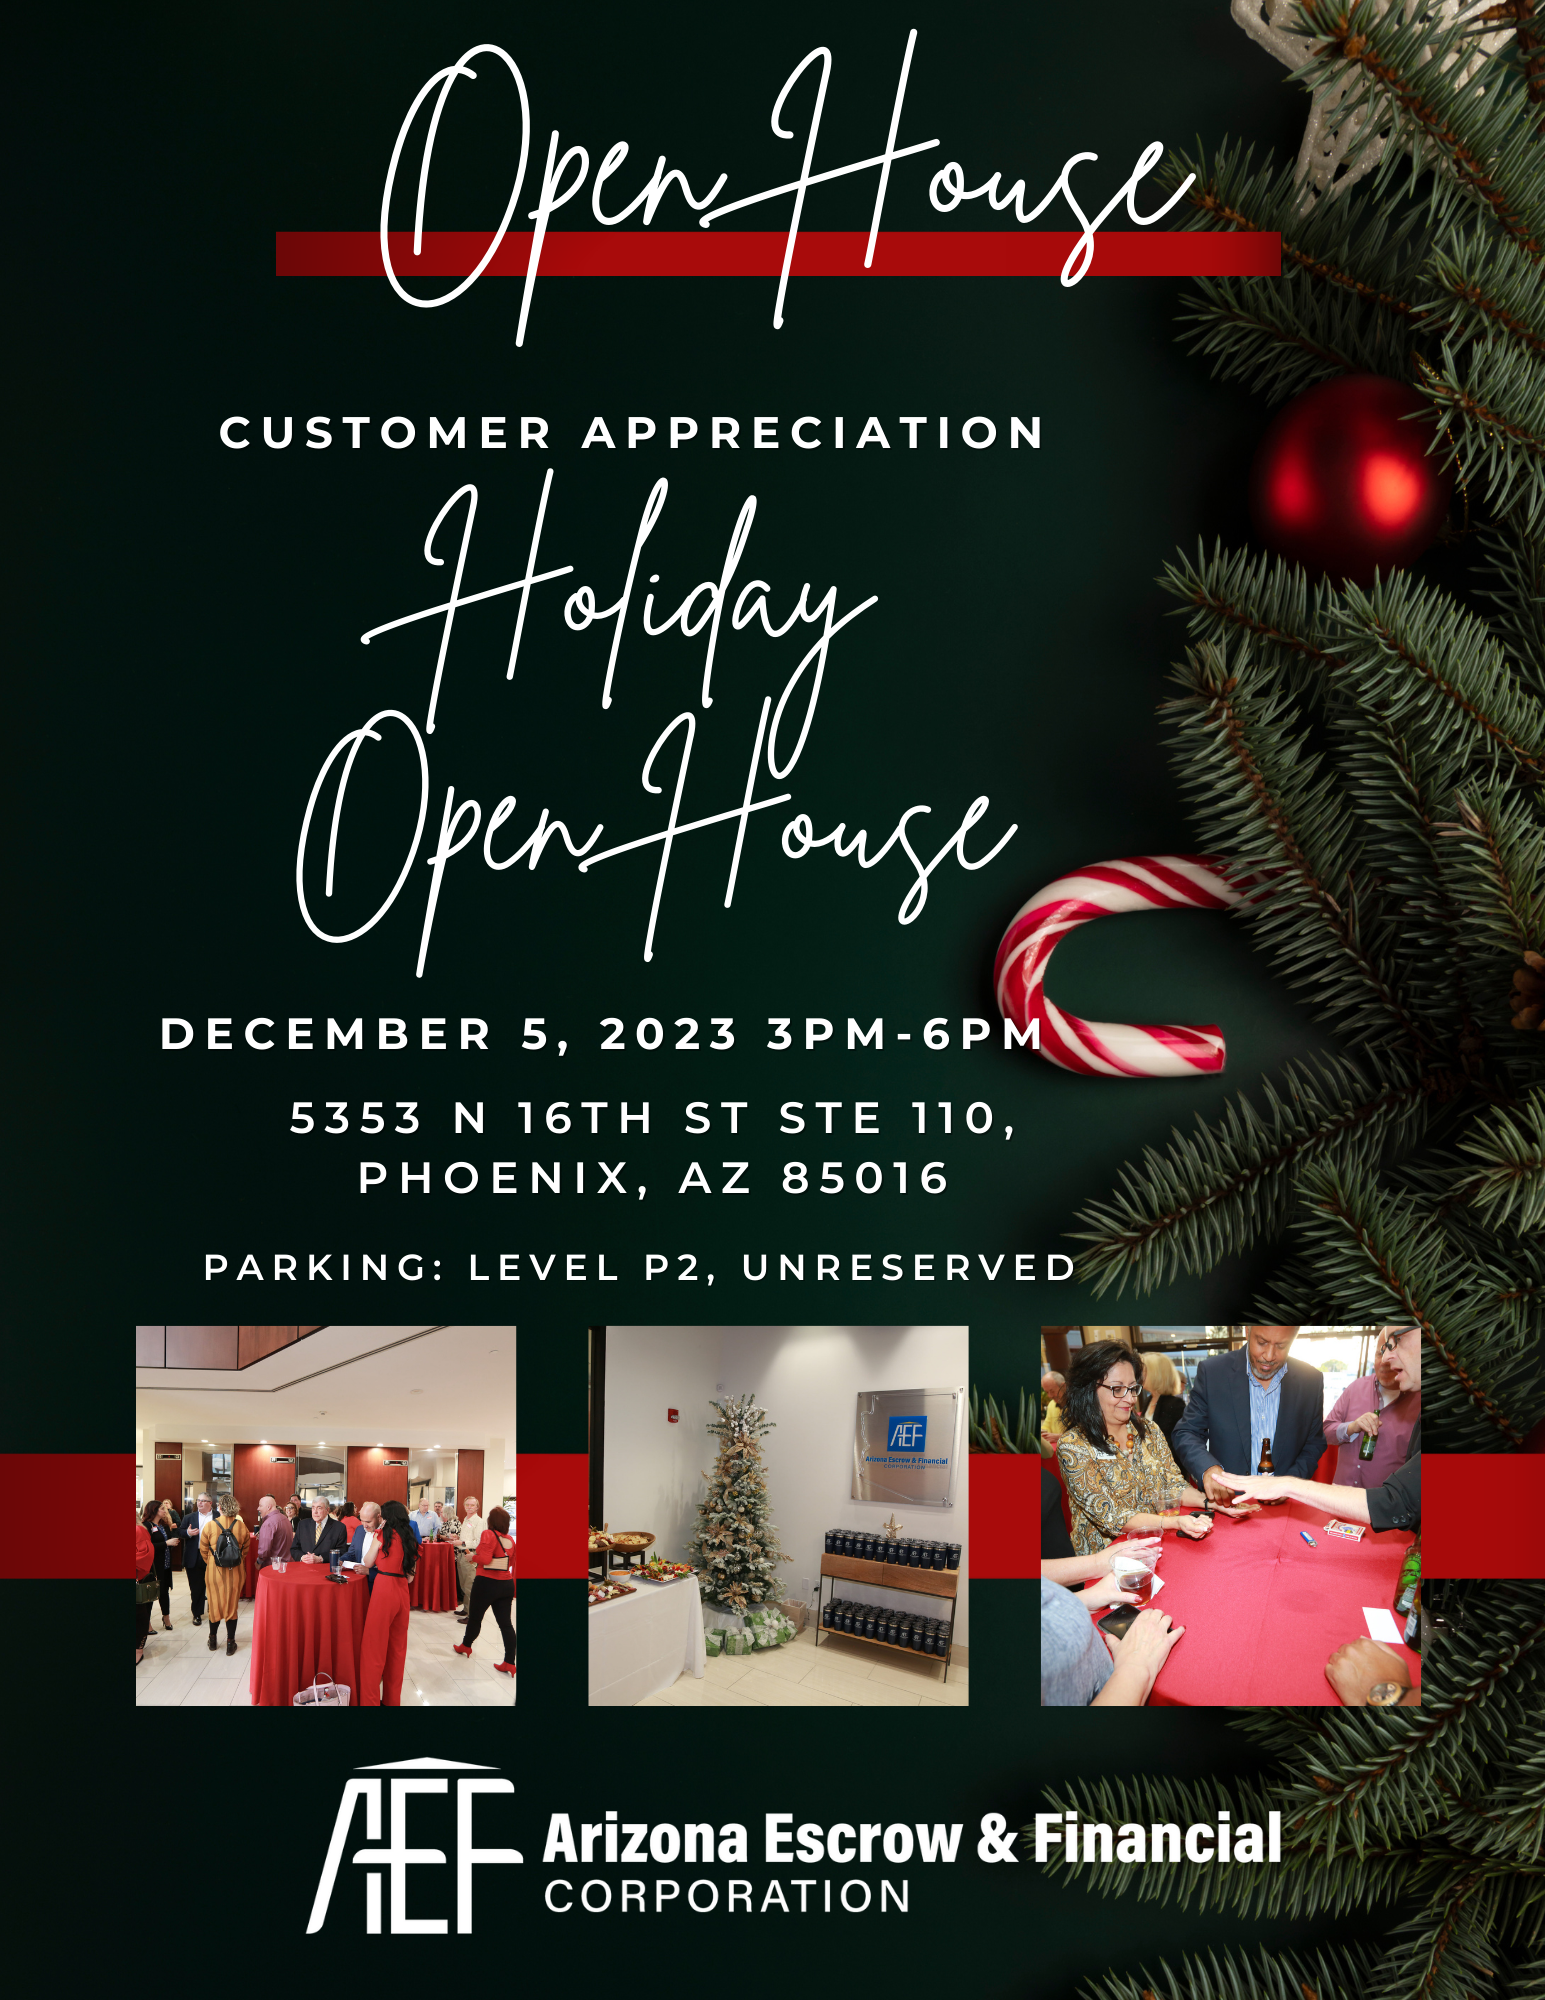 Red and green christmas flyer for open house